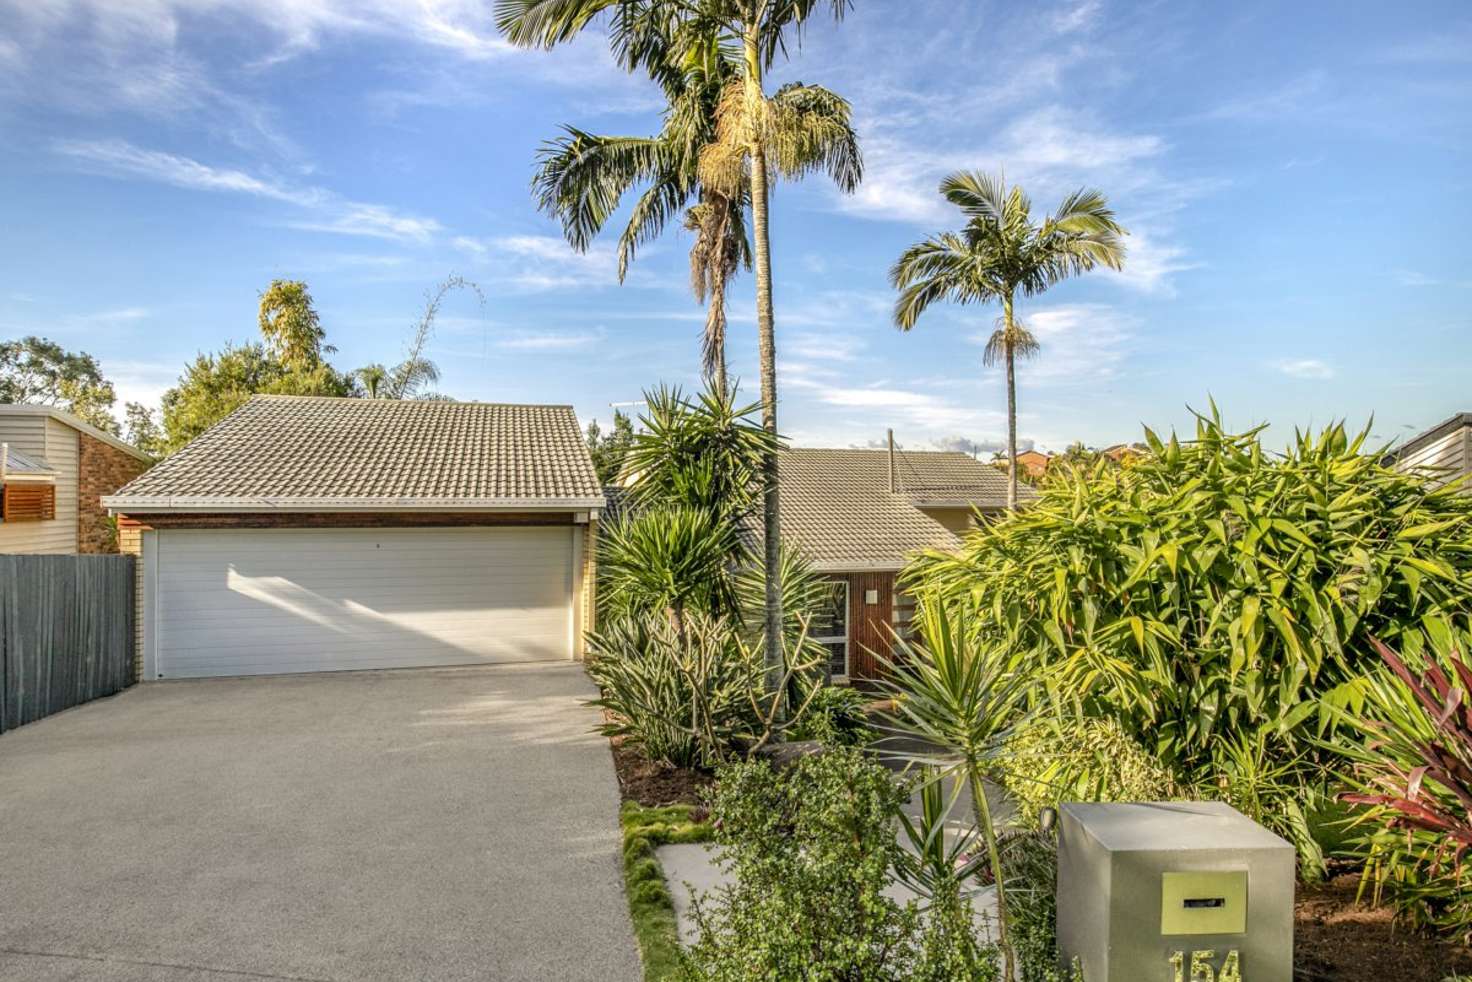 Main view of Homely house listing, 154 Mount Ommaney Dr, Jindalee QLD 4074